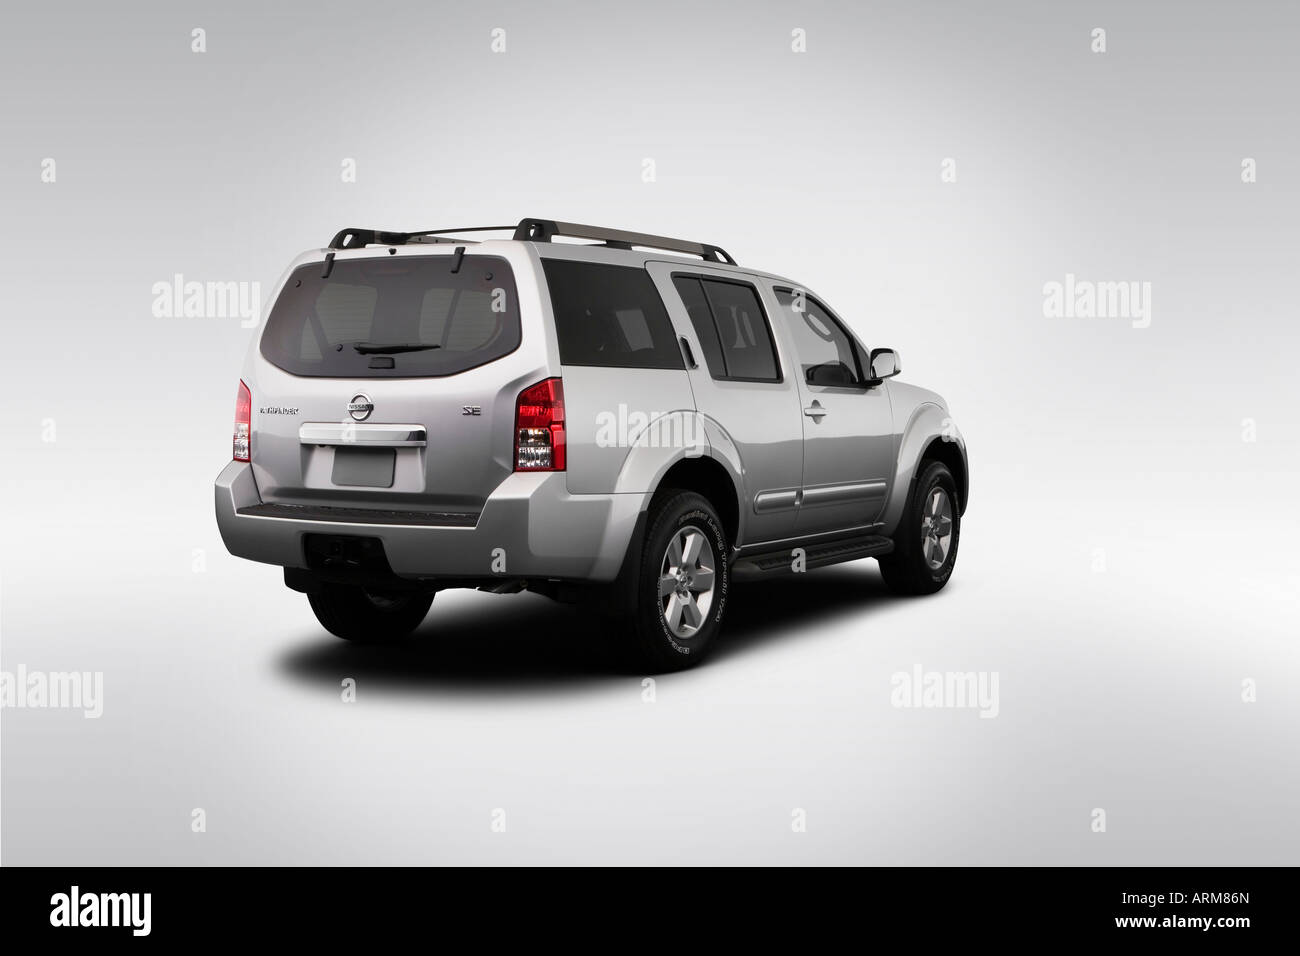 2008 Nissan Pathfinder SE in Silver - Rear angle view Stock Photo